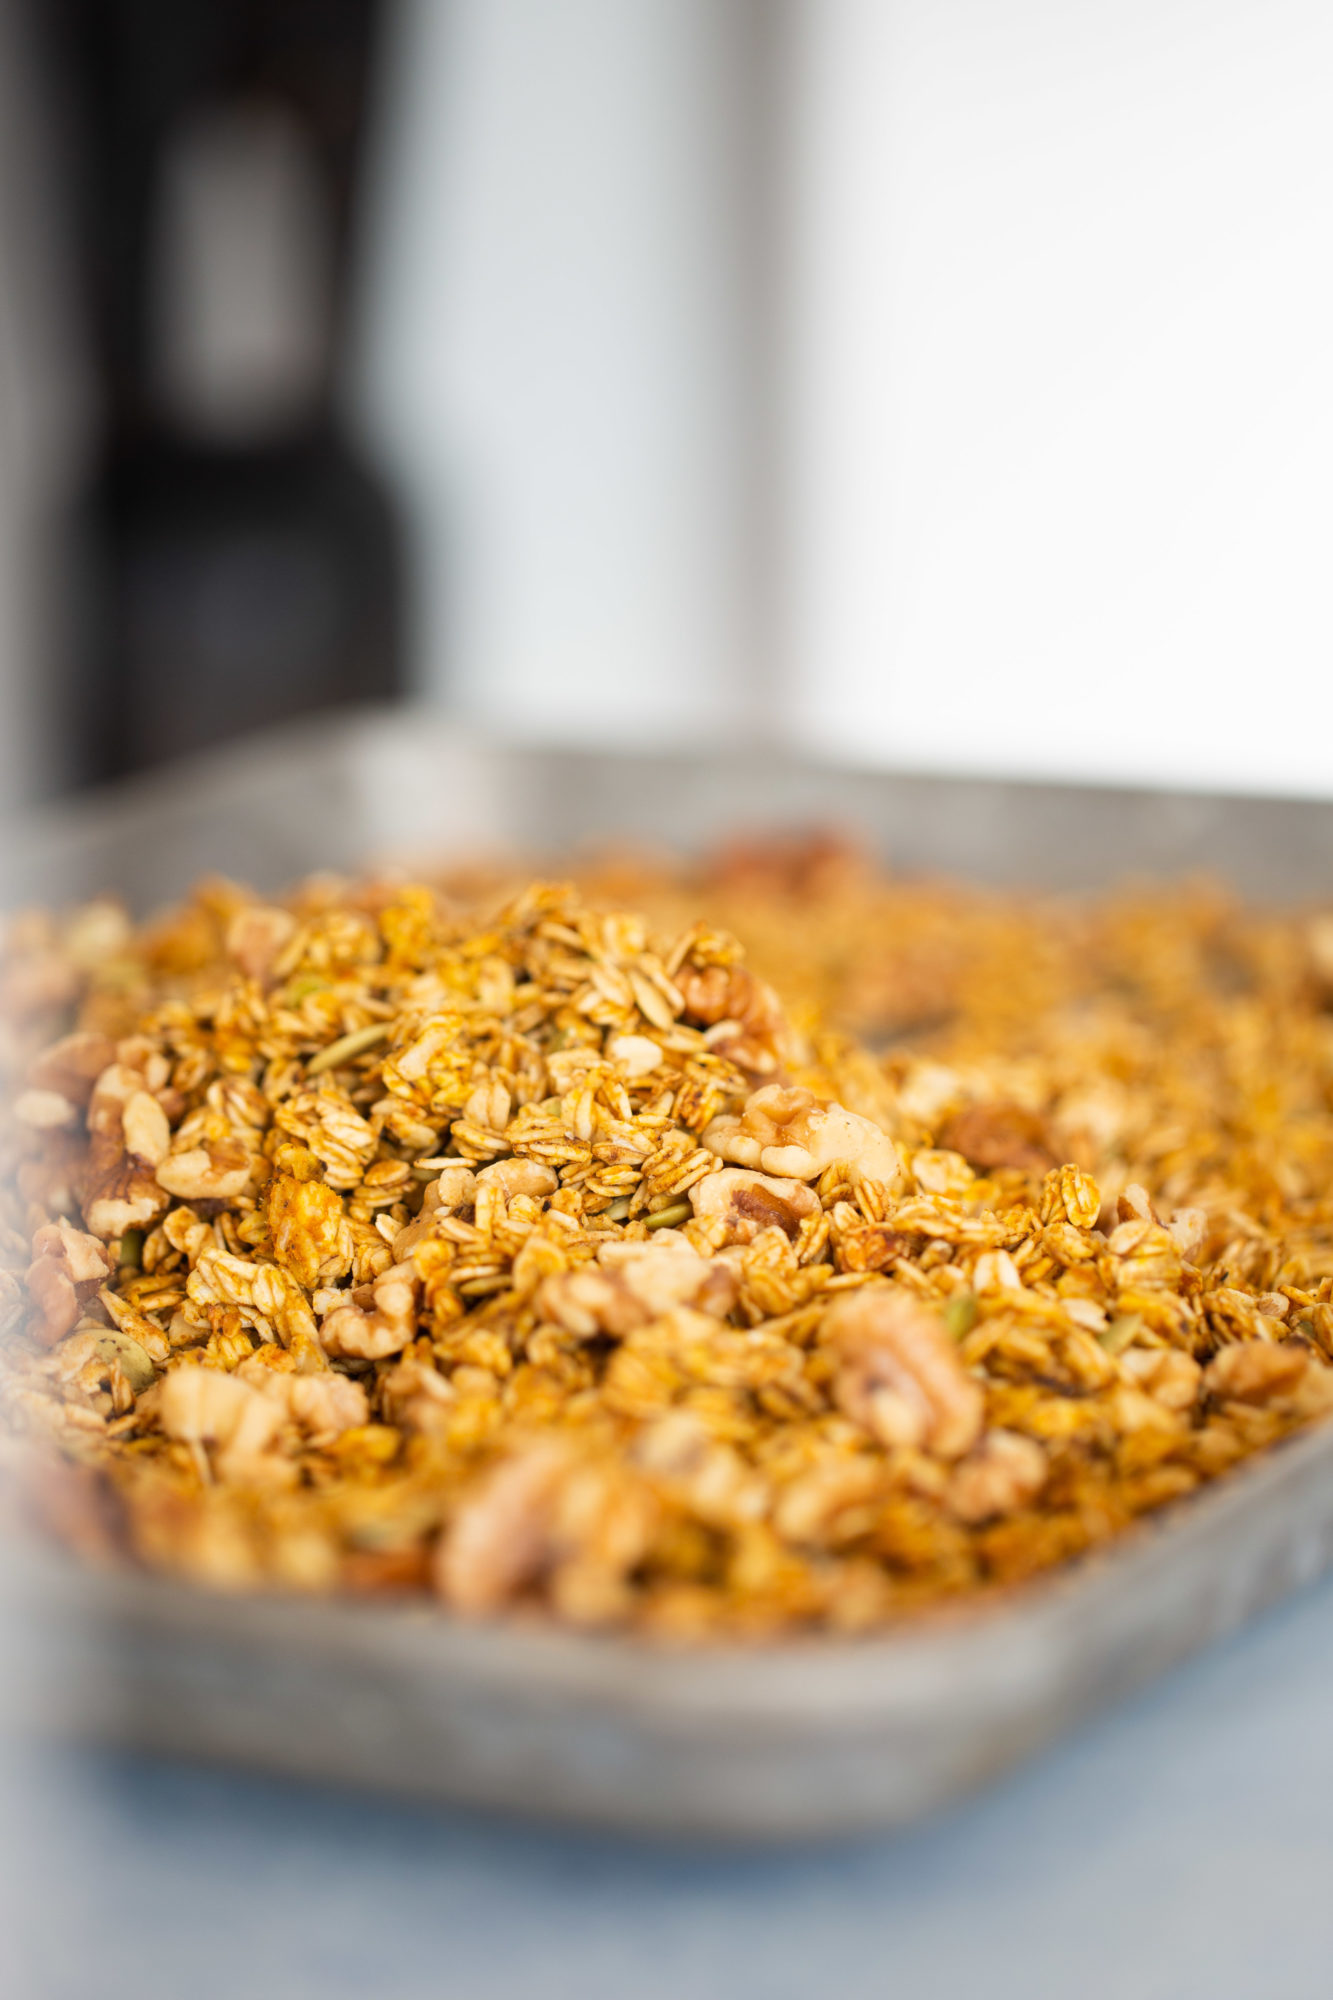 baked granola in a bakin sheet with walnuts and pepitas.